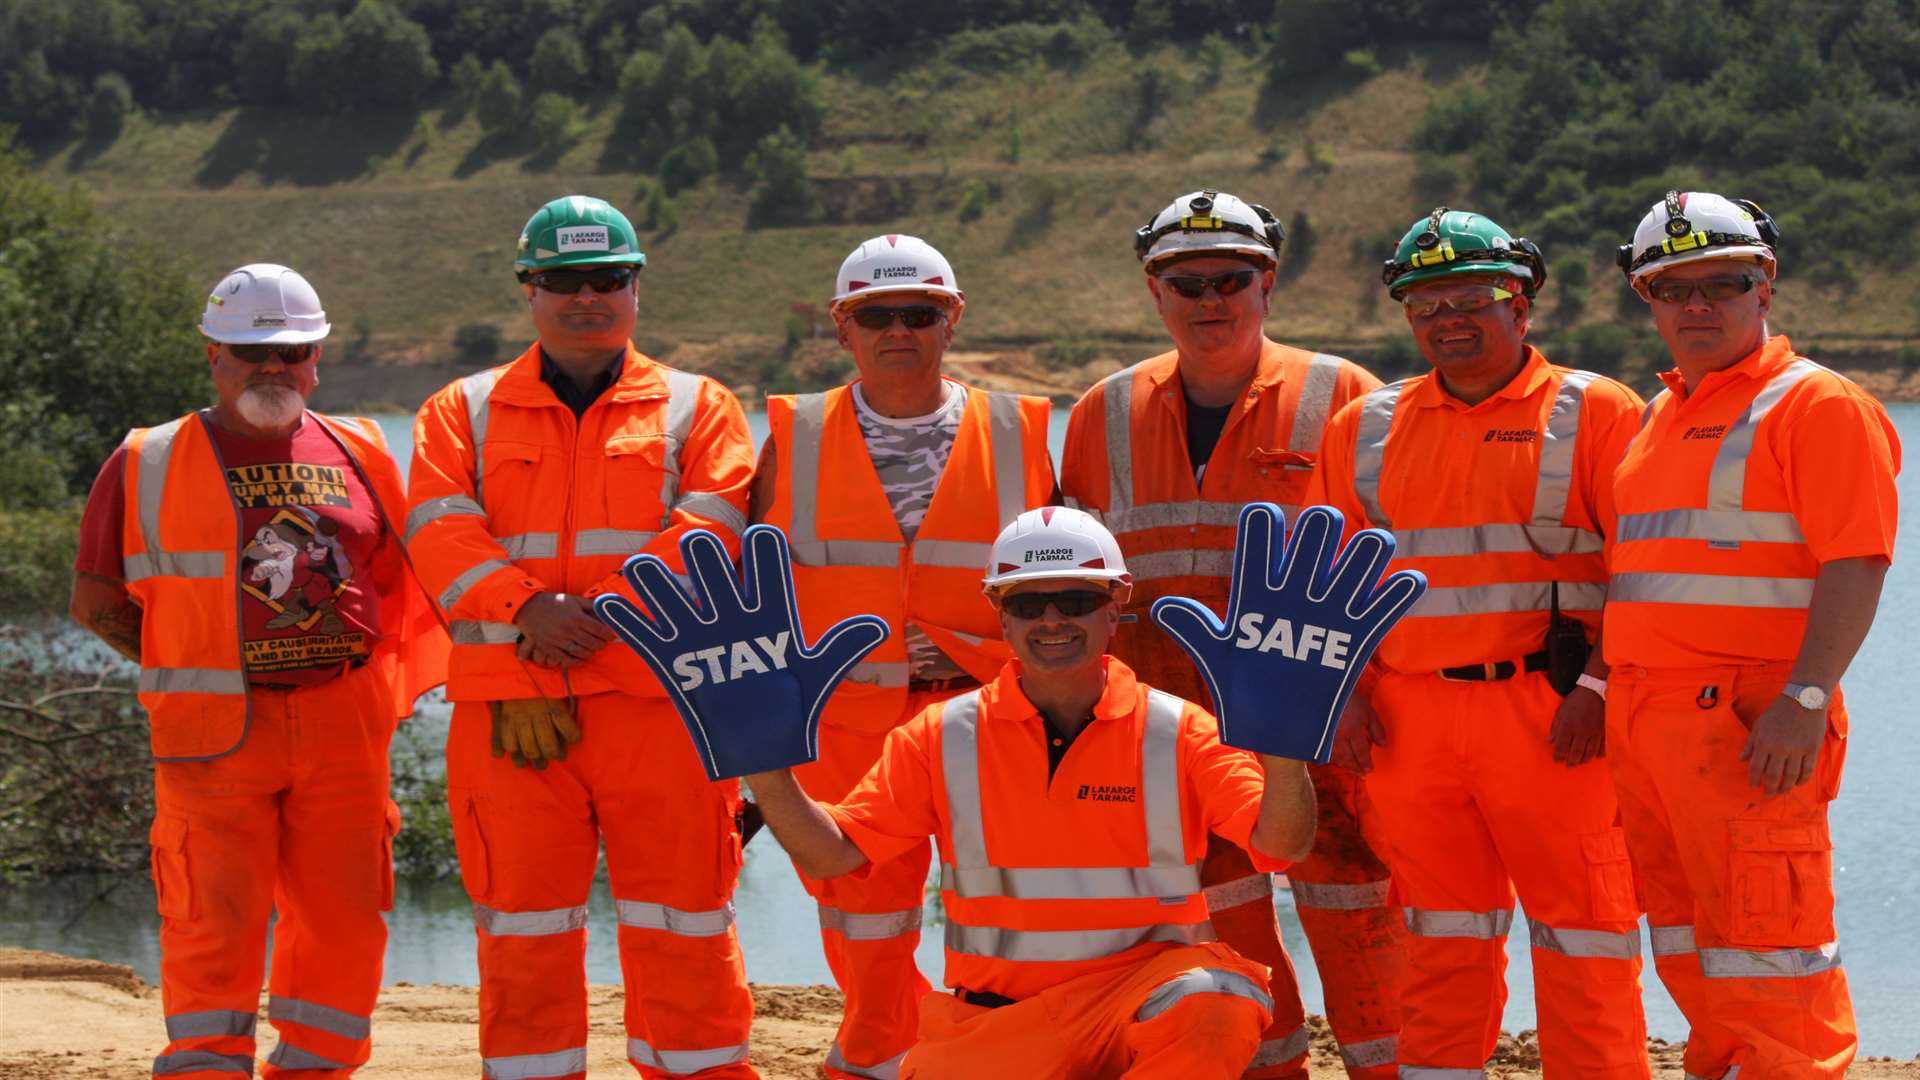 Lafarge Tarmac's staff including Tony Moore (front) were present at the Stay Safe event